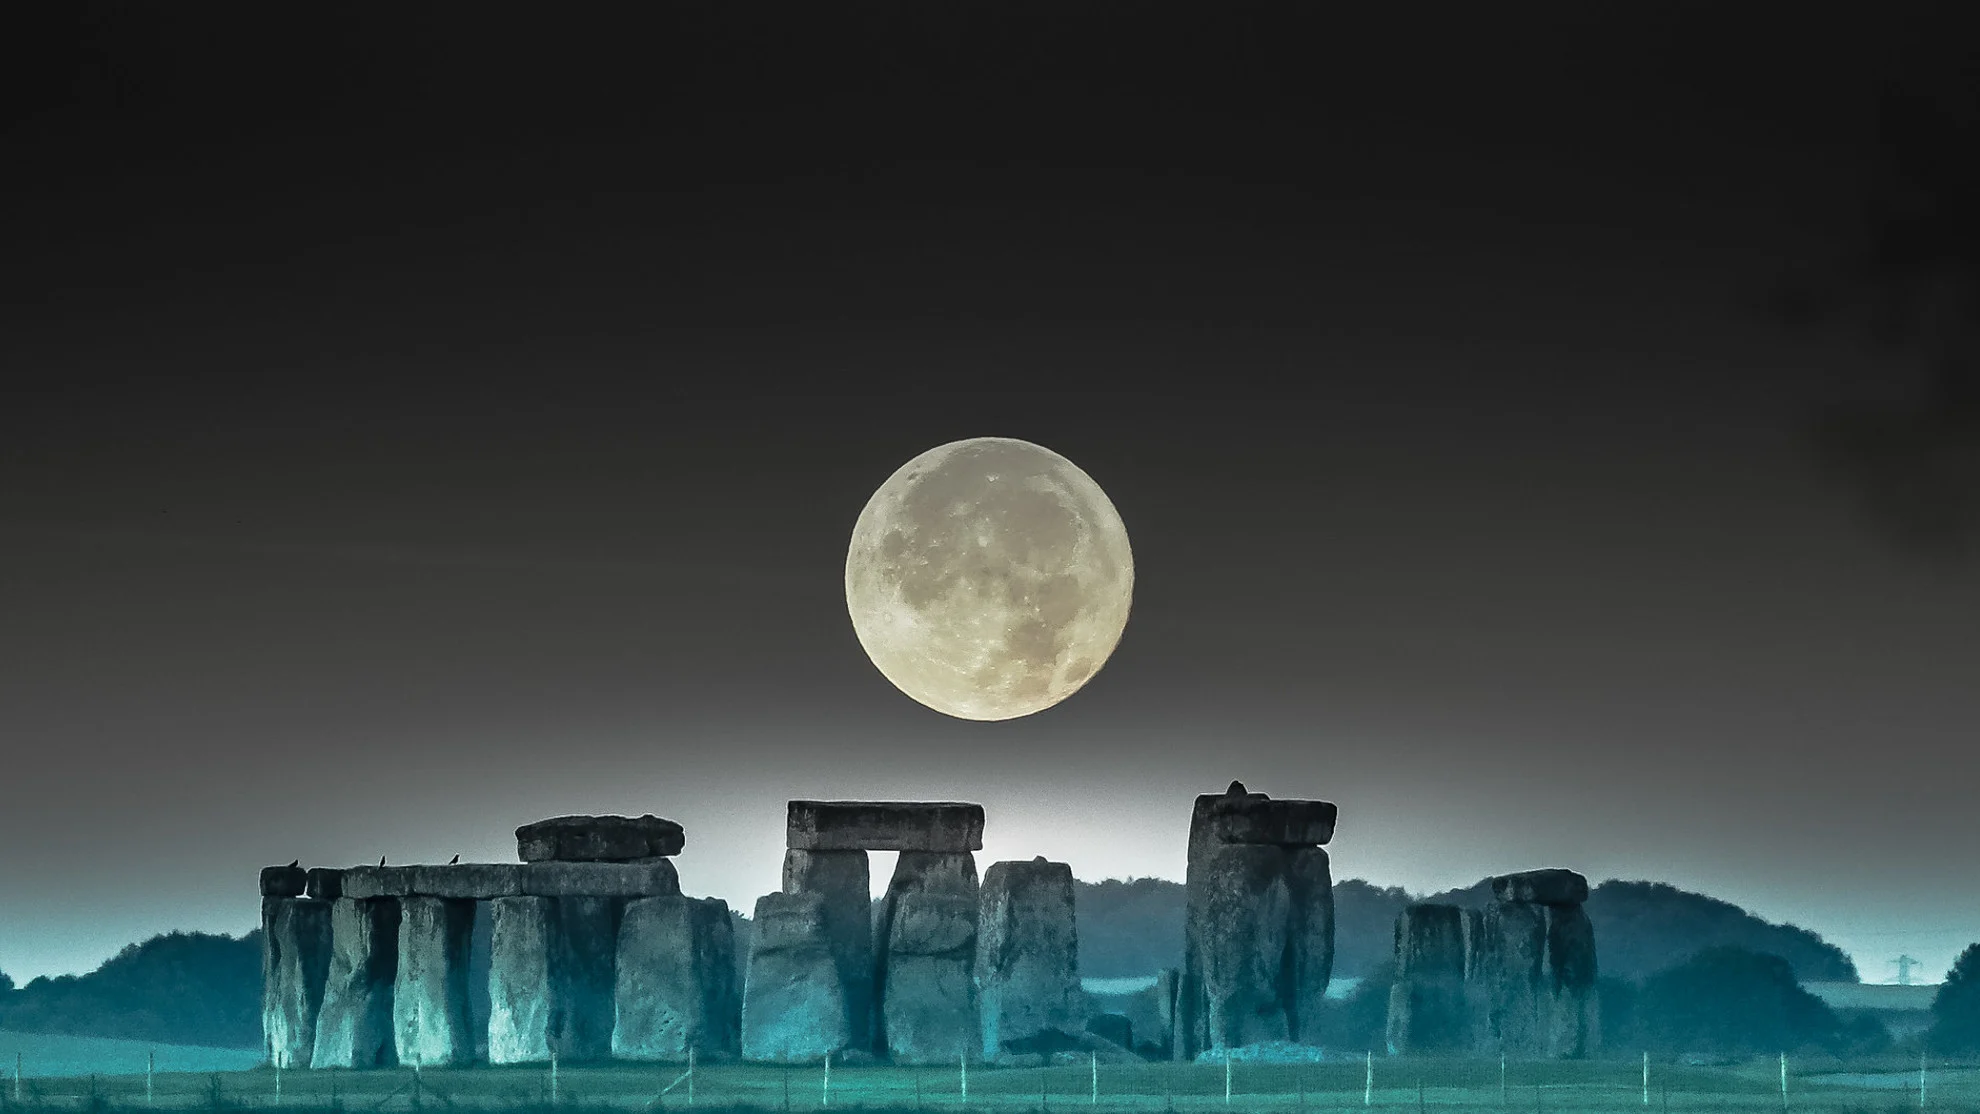 Look up! The first Full Moon of the Summer will shine tonight. See why it's a special one, here